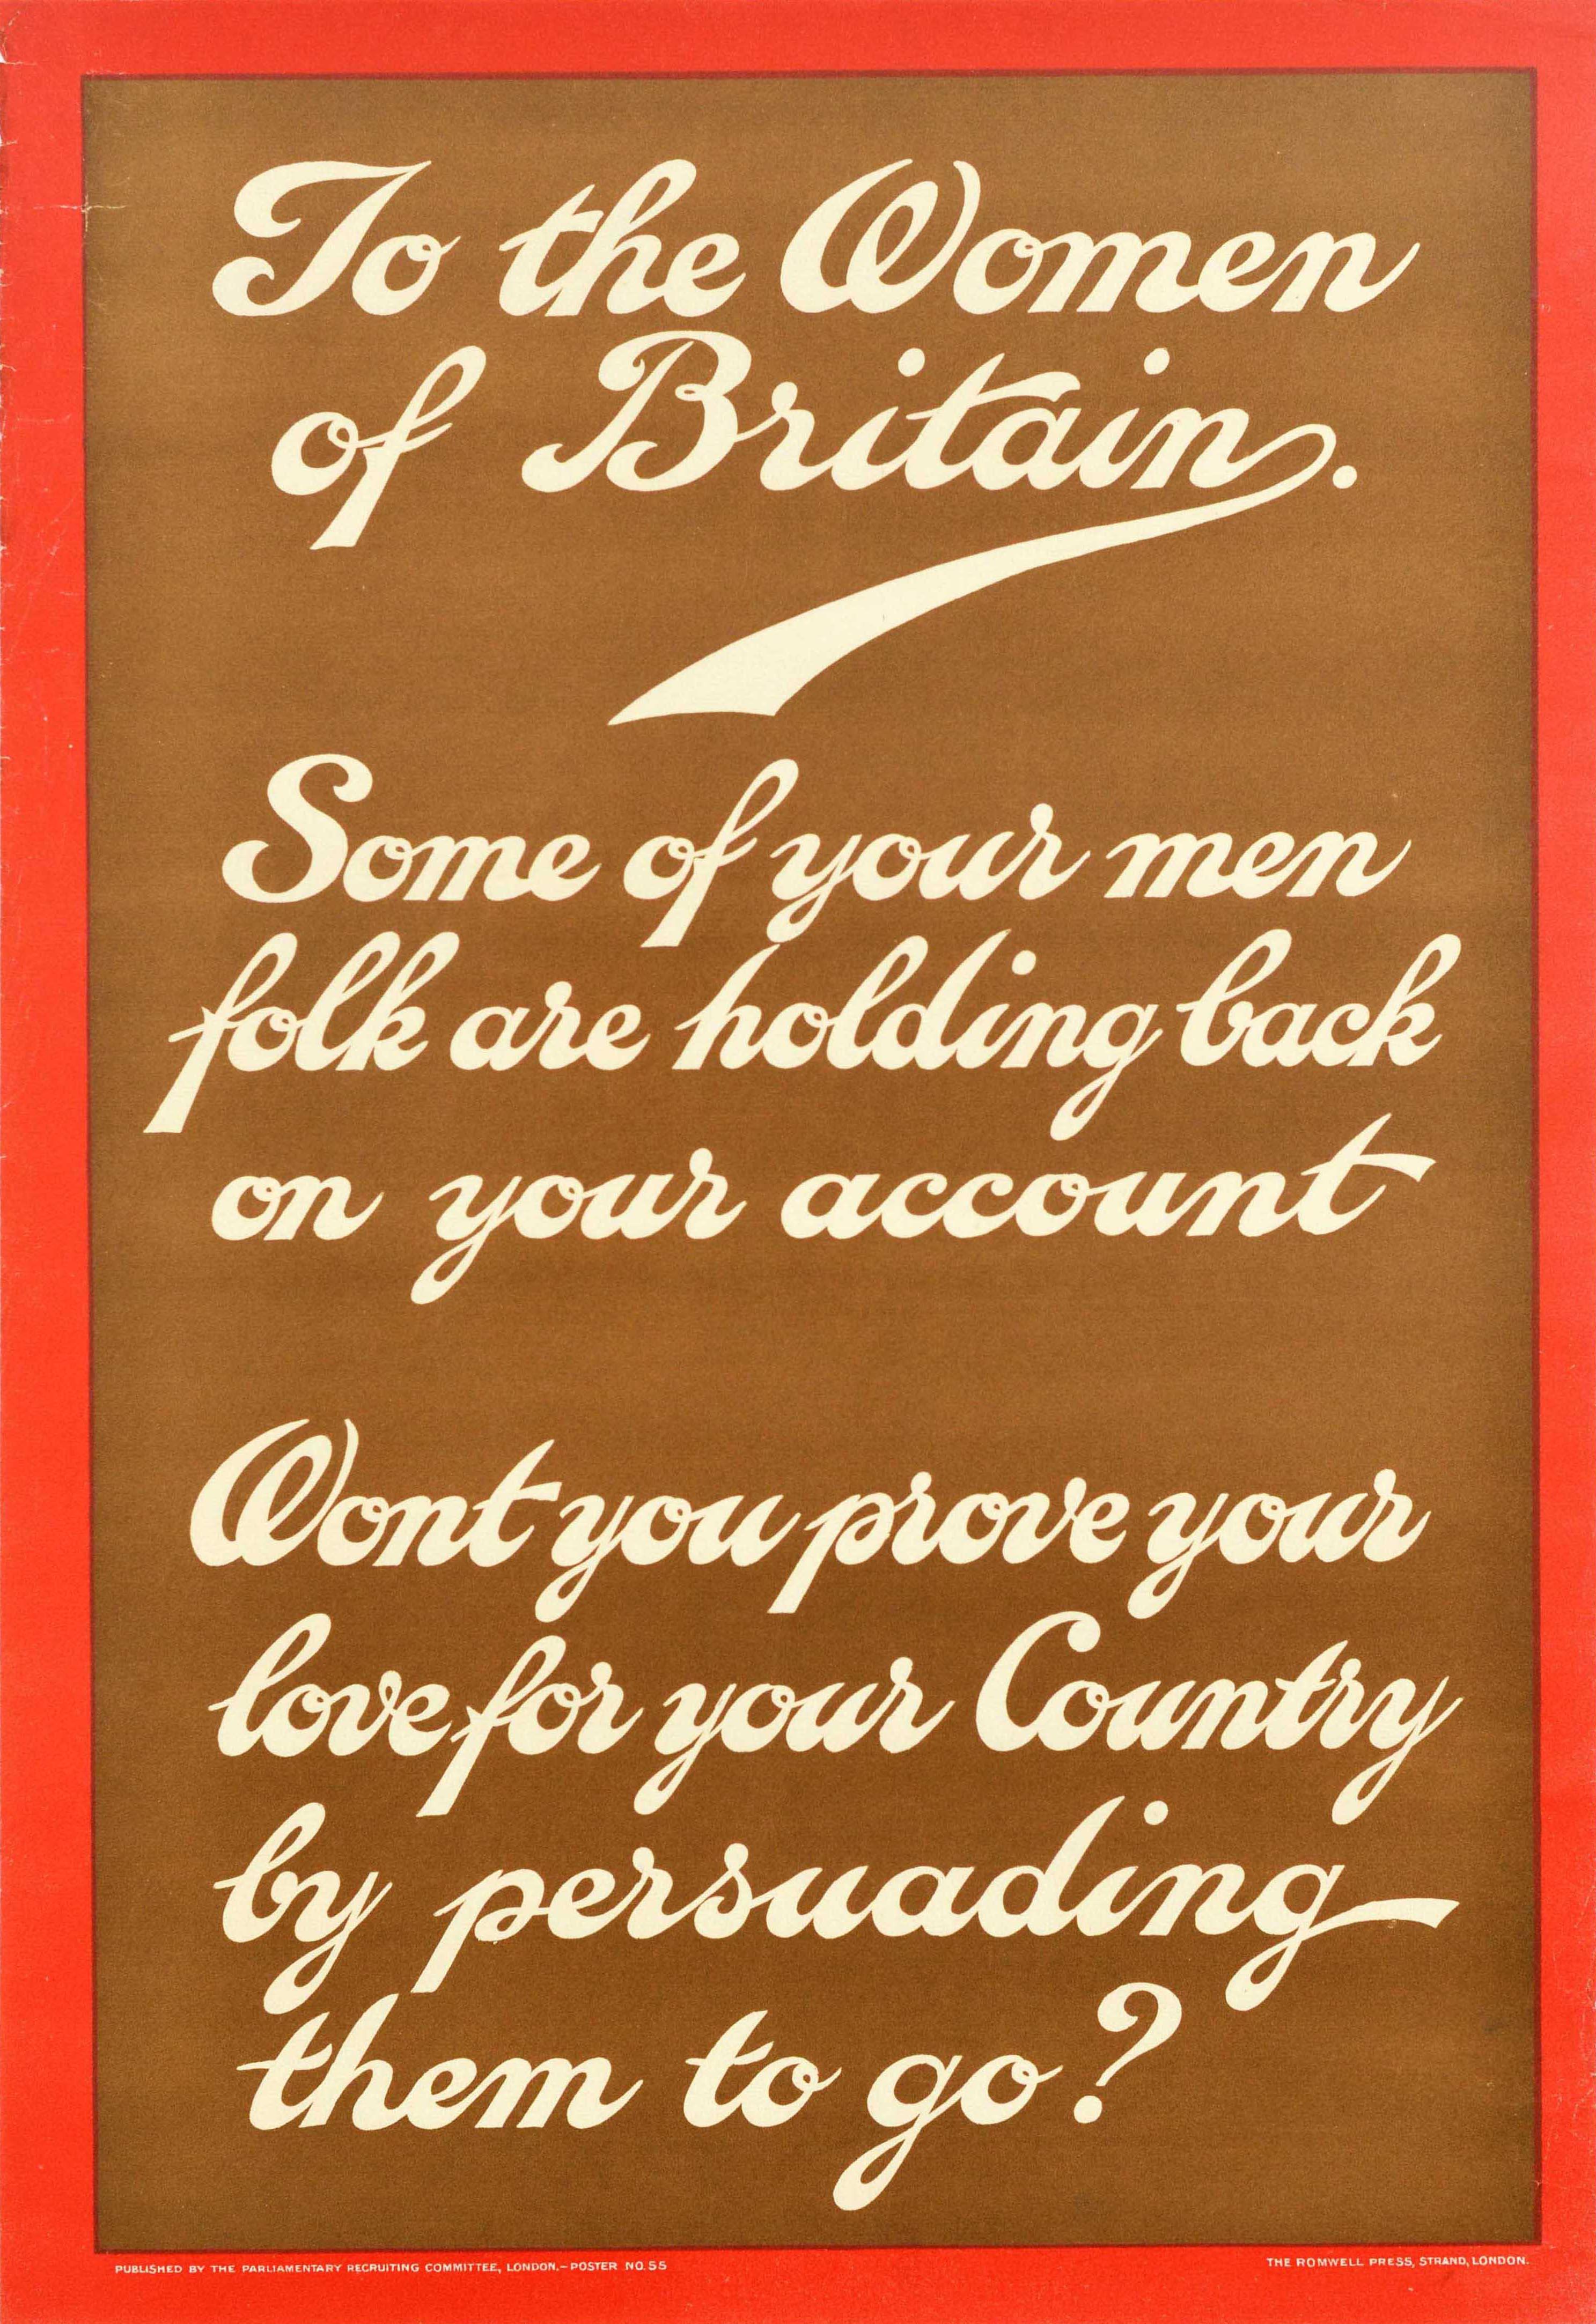 Unknown Print - Original Antique World War One Recruitment Poster To The Women Of Britain WWI